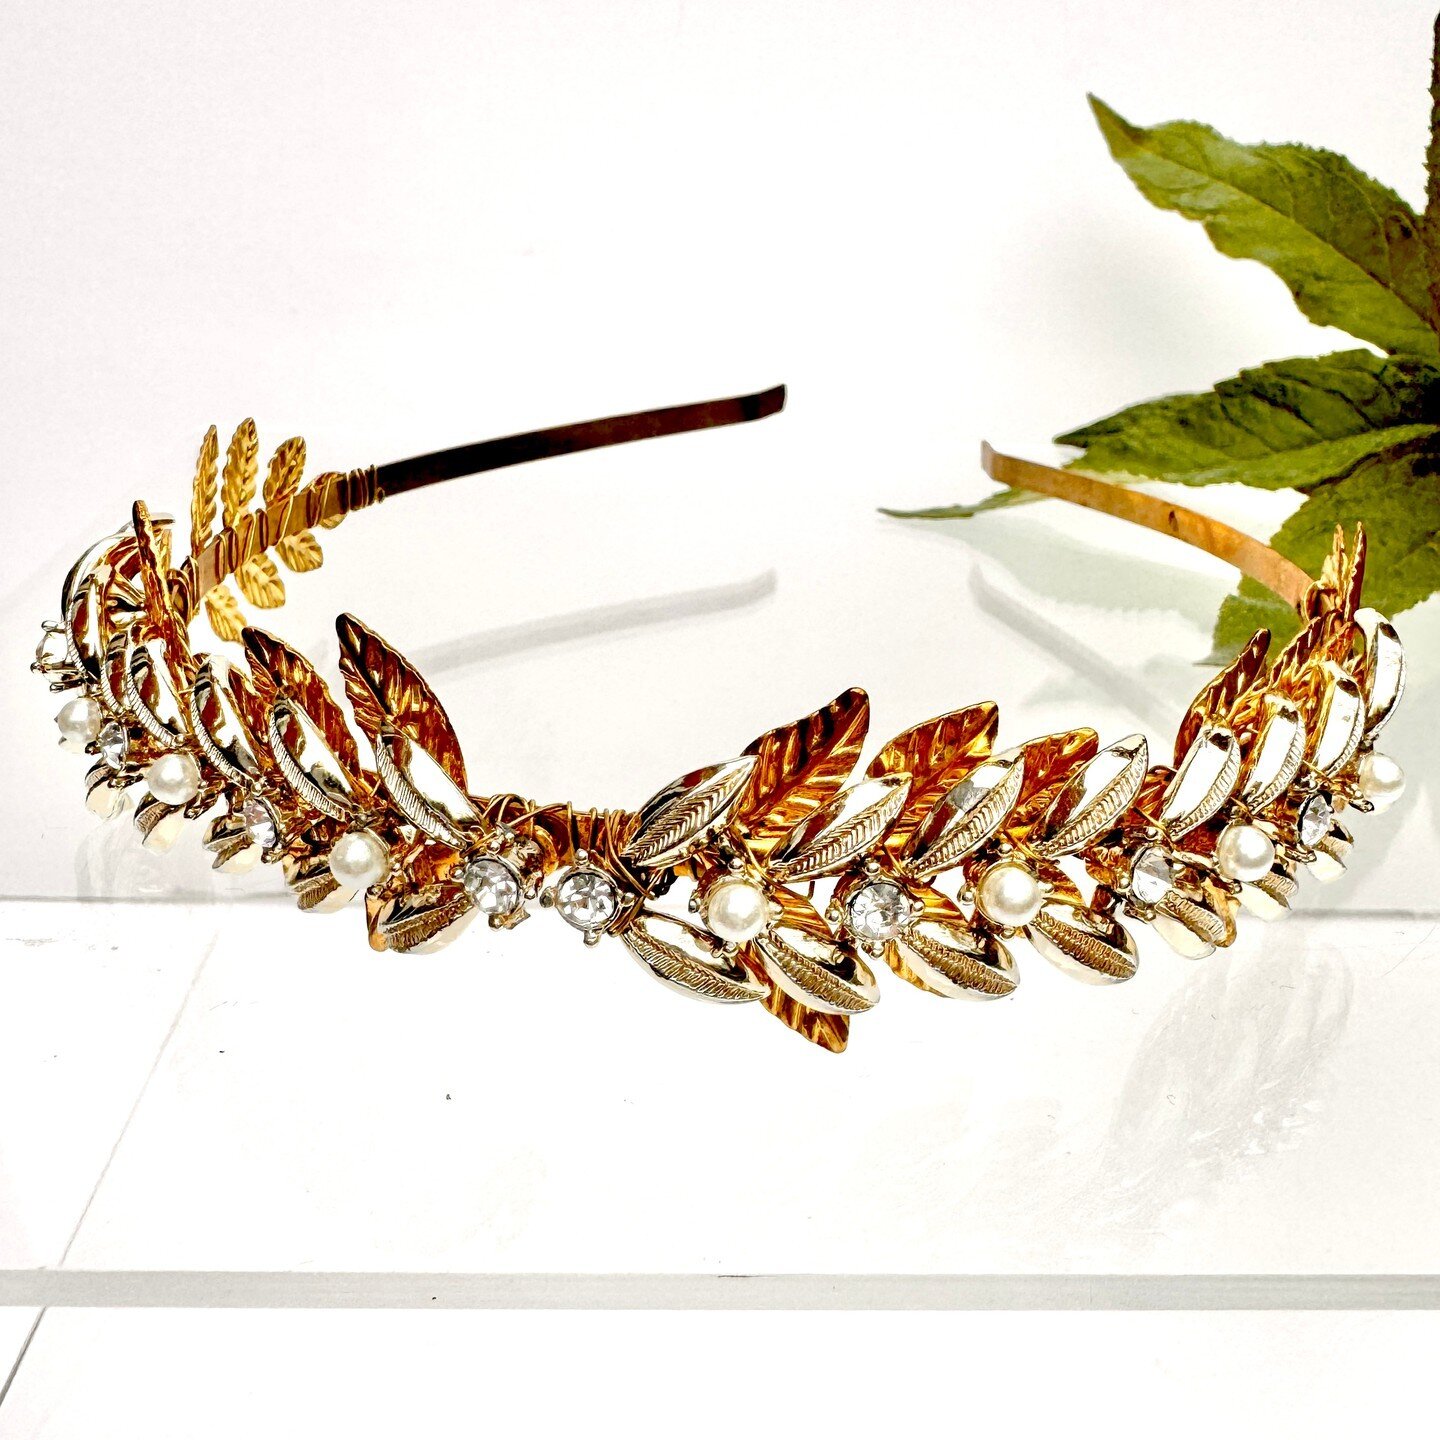 This gorgeous tiara is hand made from a genuine 1950s piece of rhinestone and simulated pearl vintage jewellery mounted on a gold tone leaf setting. Ideal if yesterday's post gave you tiara FOMO!⁣
.⁣
.⁣
.⁣
.⁣
.⁣
#headband #tiara #headpiece #vintageje